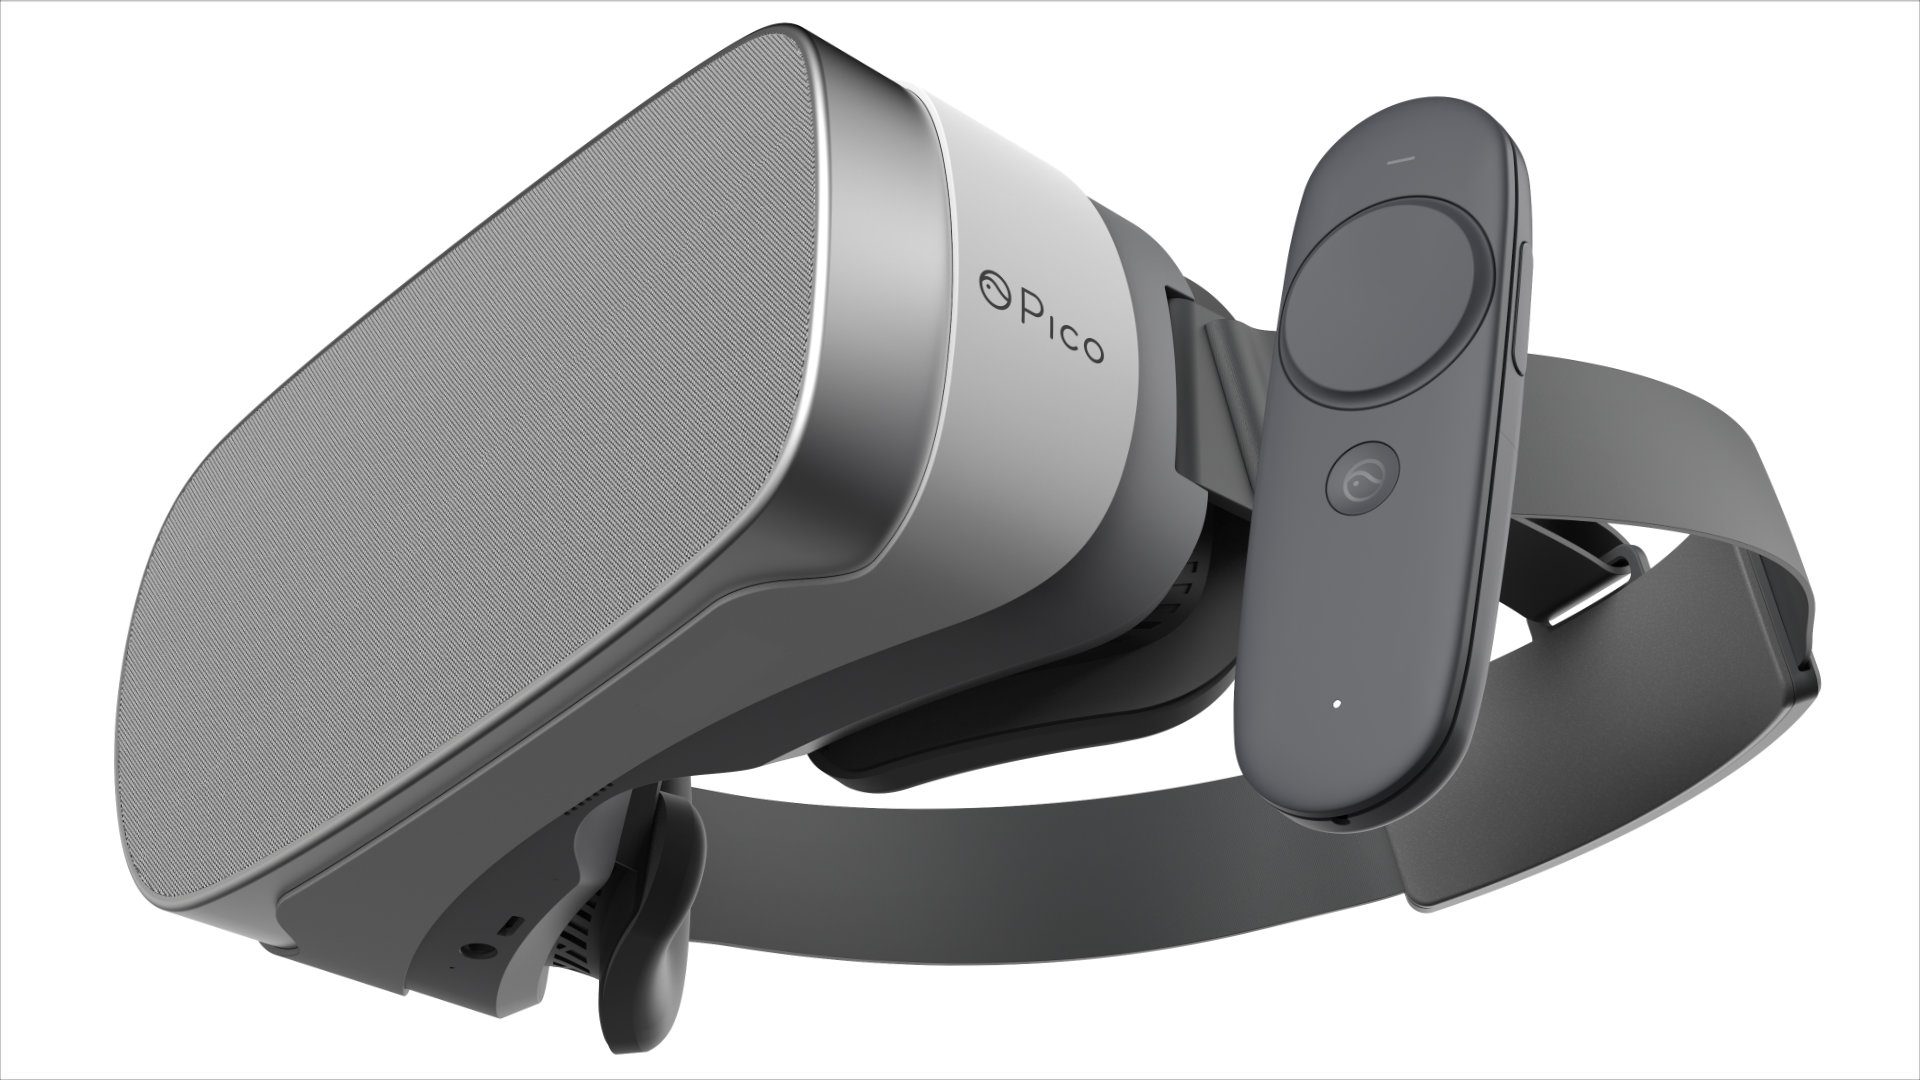 Scalefast Launches Official Online Store for Pico Goblin VR Headset